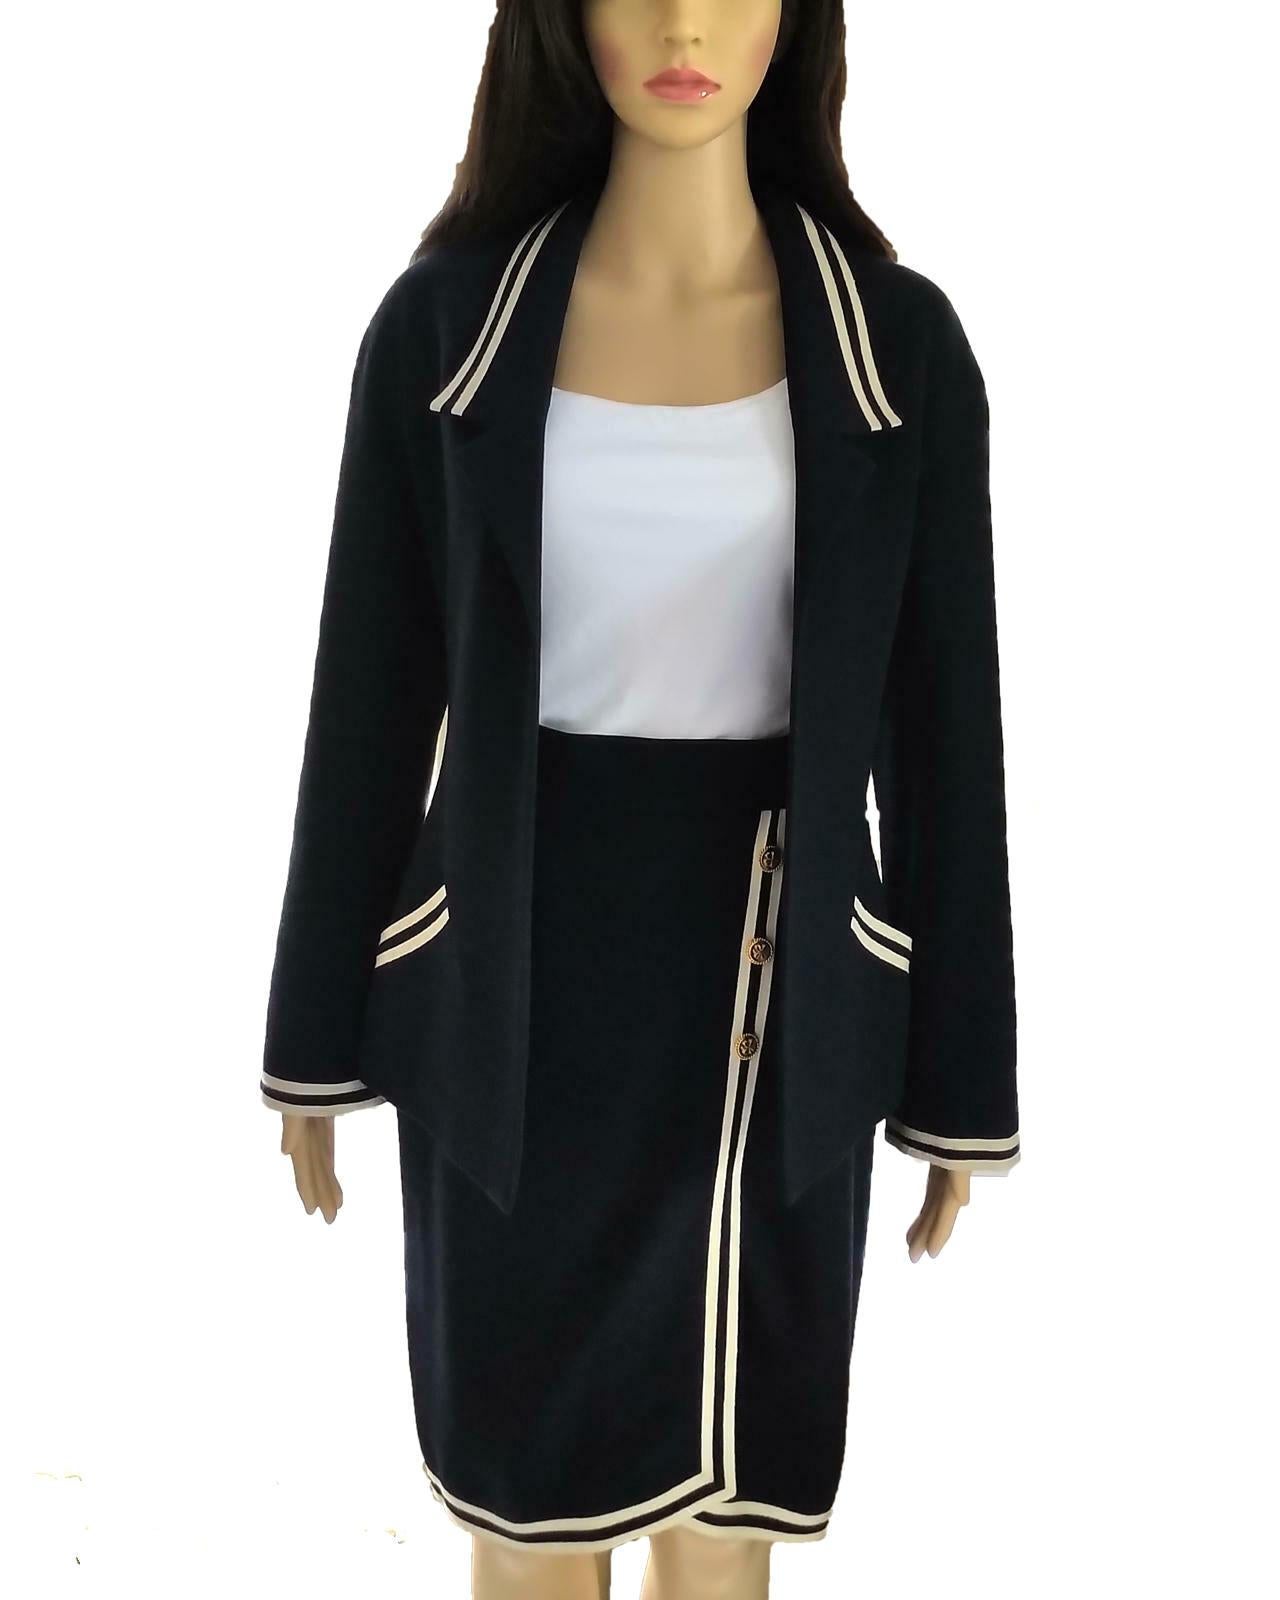 Ultra rare & classic, Chanel navy & ivory tweed & grosgrain jacket & skirt suit in size FR 34/ US 2. Will also fit a size FR 36/ 4 due to cut. Eternally timeless & sophisticated, with nautical undertones & Côte d'Azur flair. Meticulously cut, tapers